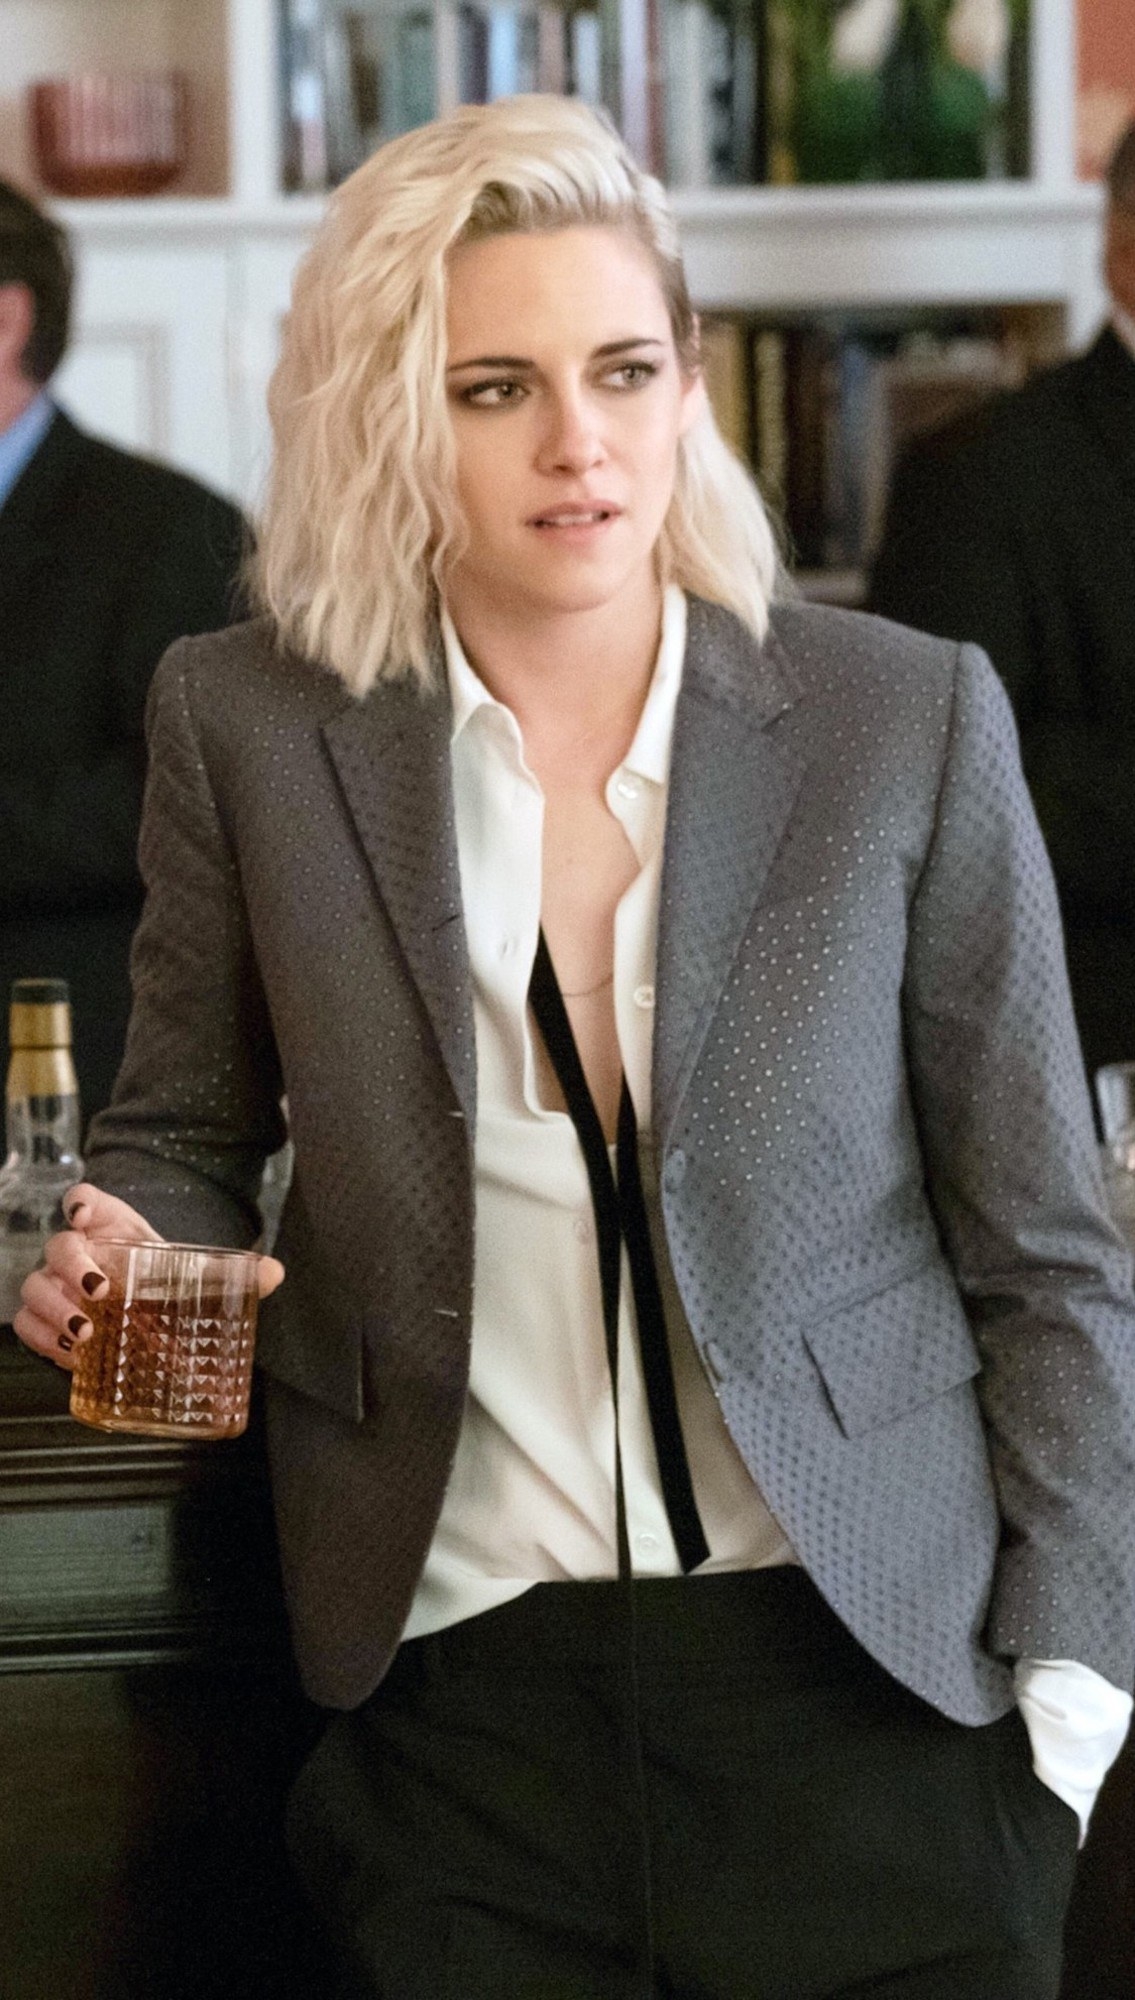 Kristen Stewart leaning up against a bar while holding a cocktail